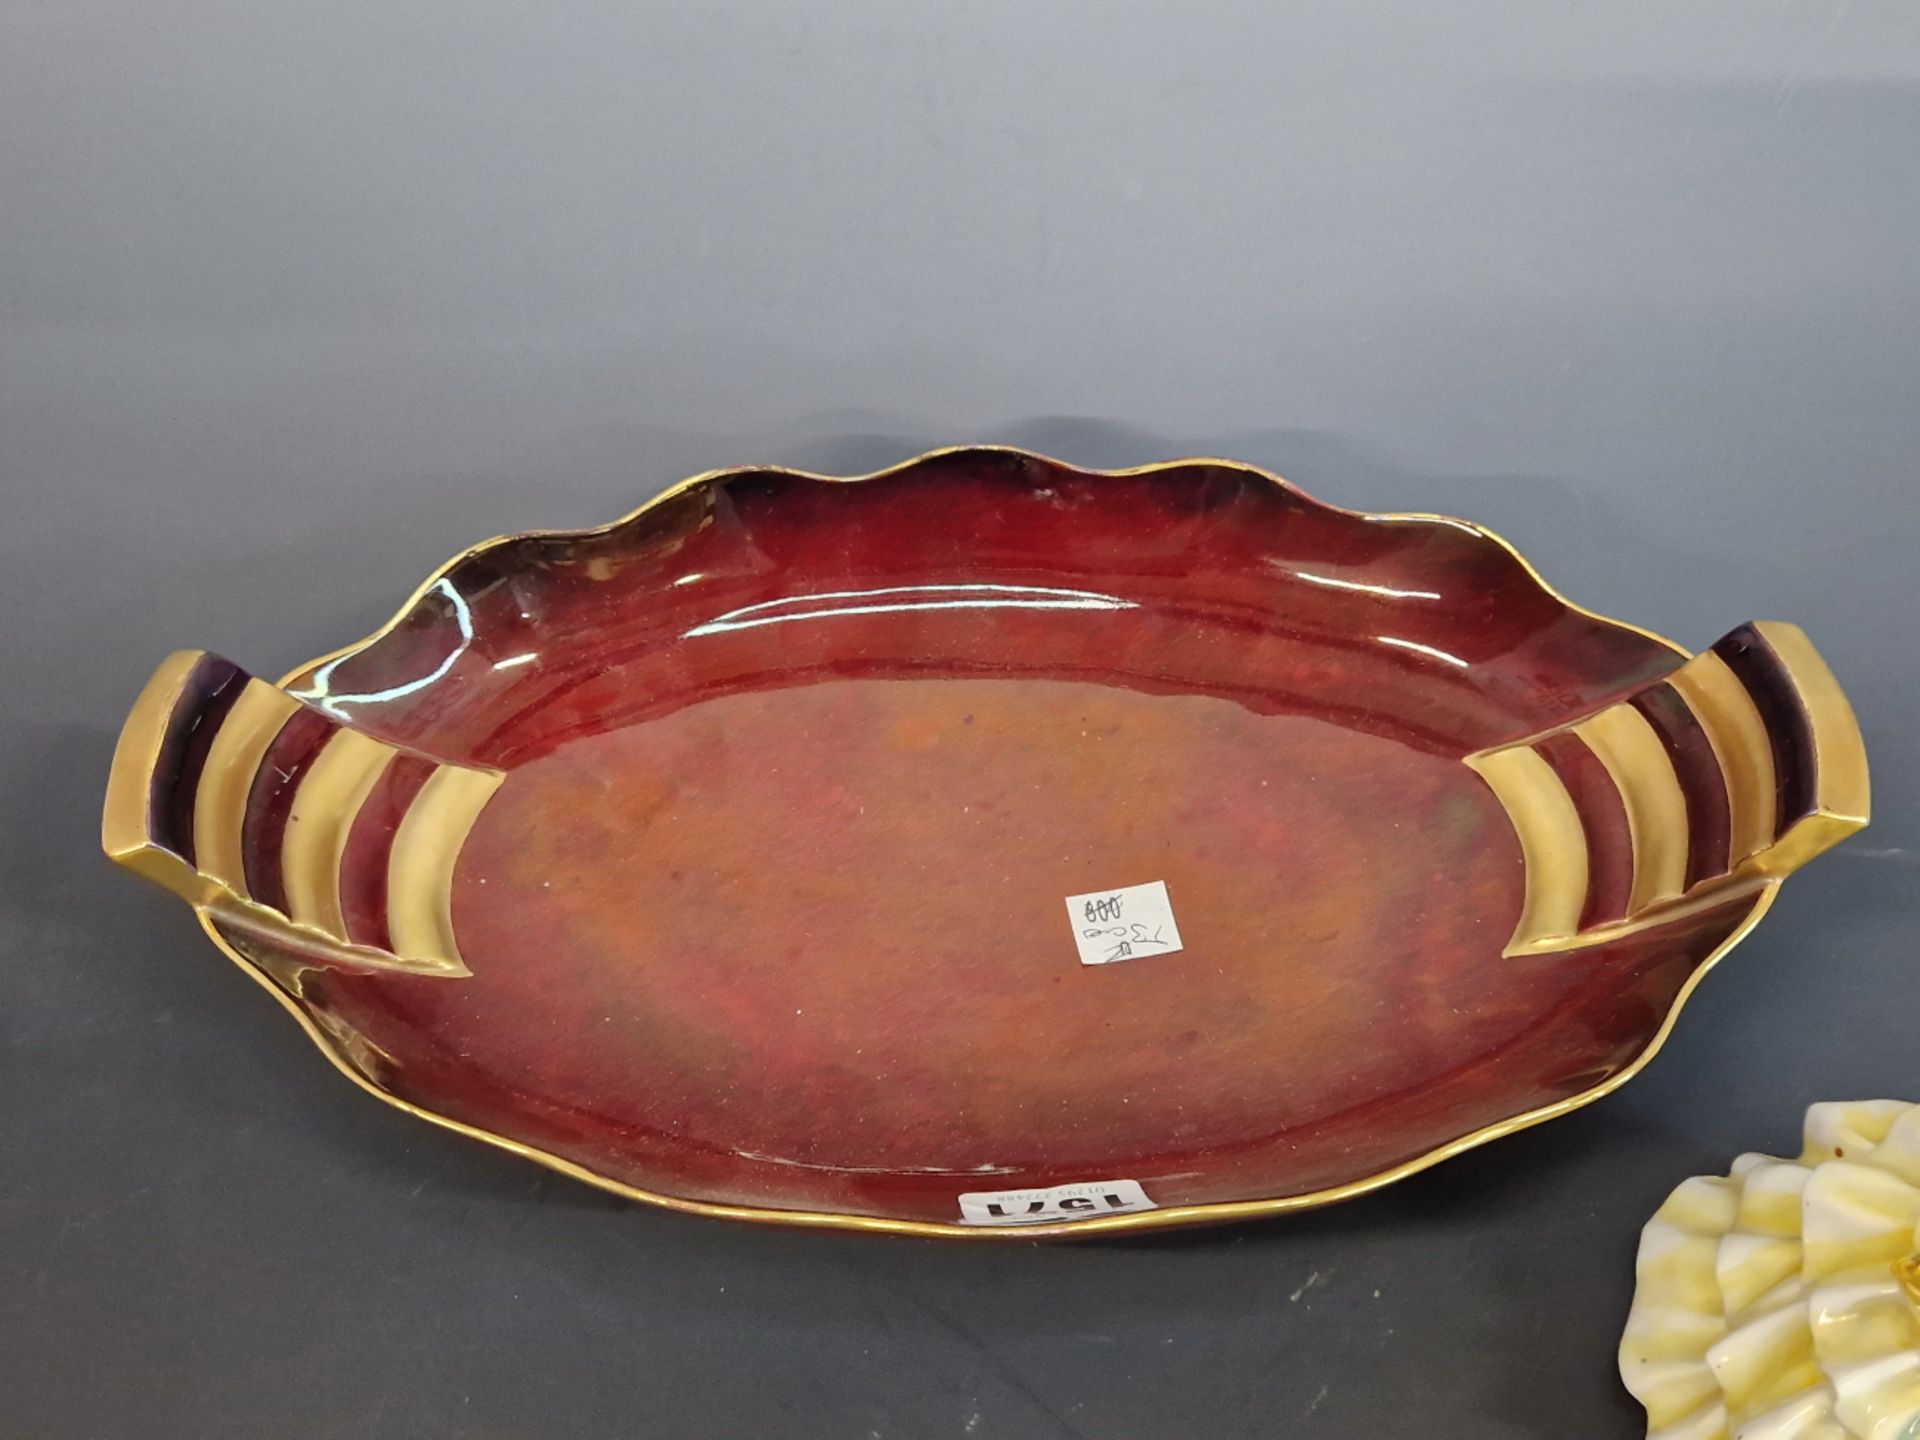 A ROYAL DOULTON FIGURE, HN 1503 TOGETHER WITH A CARLTON WARE ROUGE ROYALE OVAL DISH - Image 2 of 4